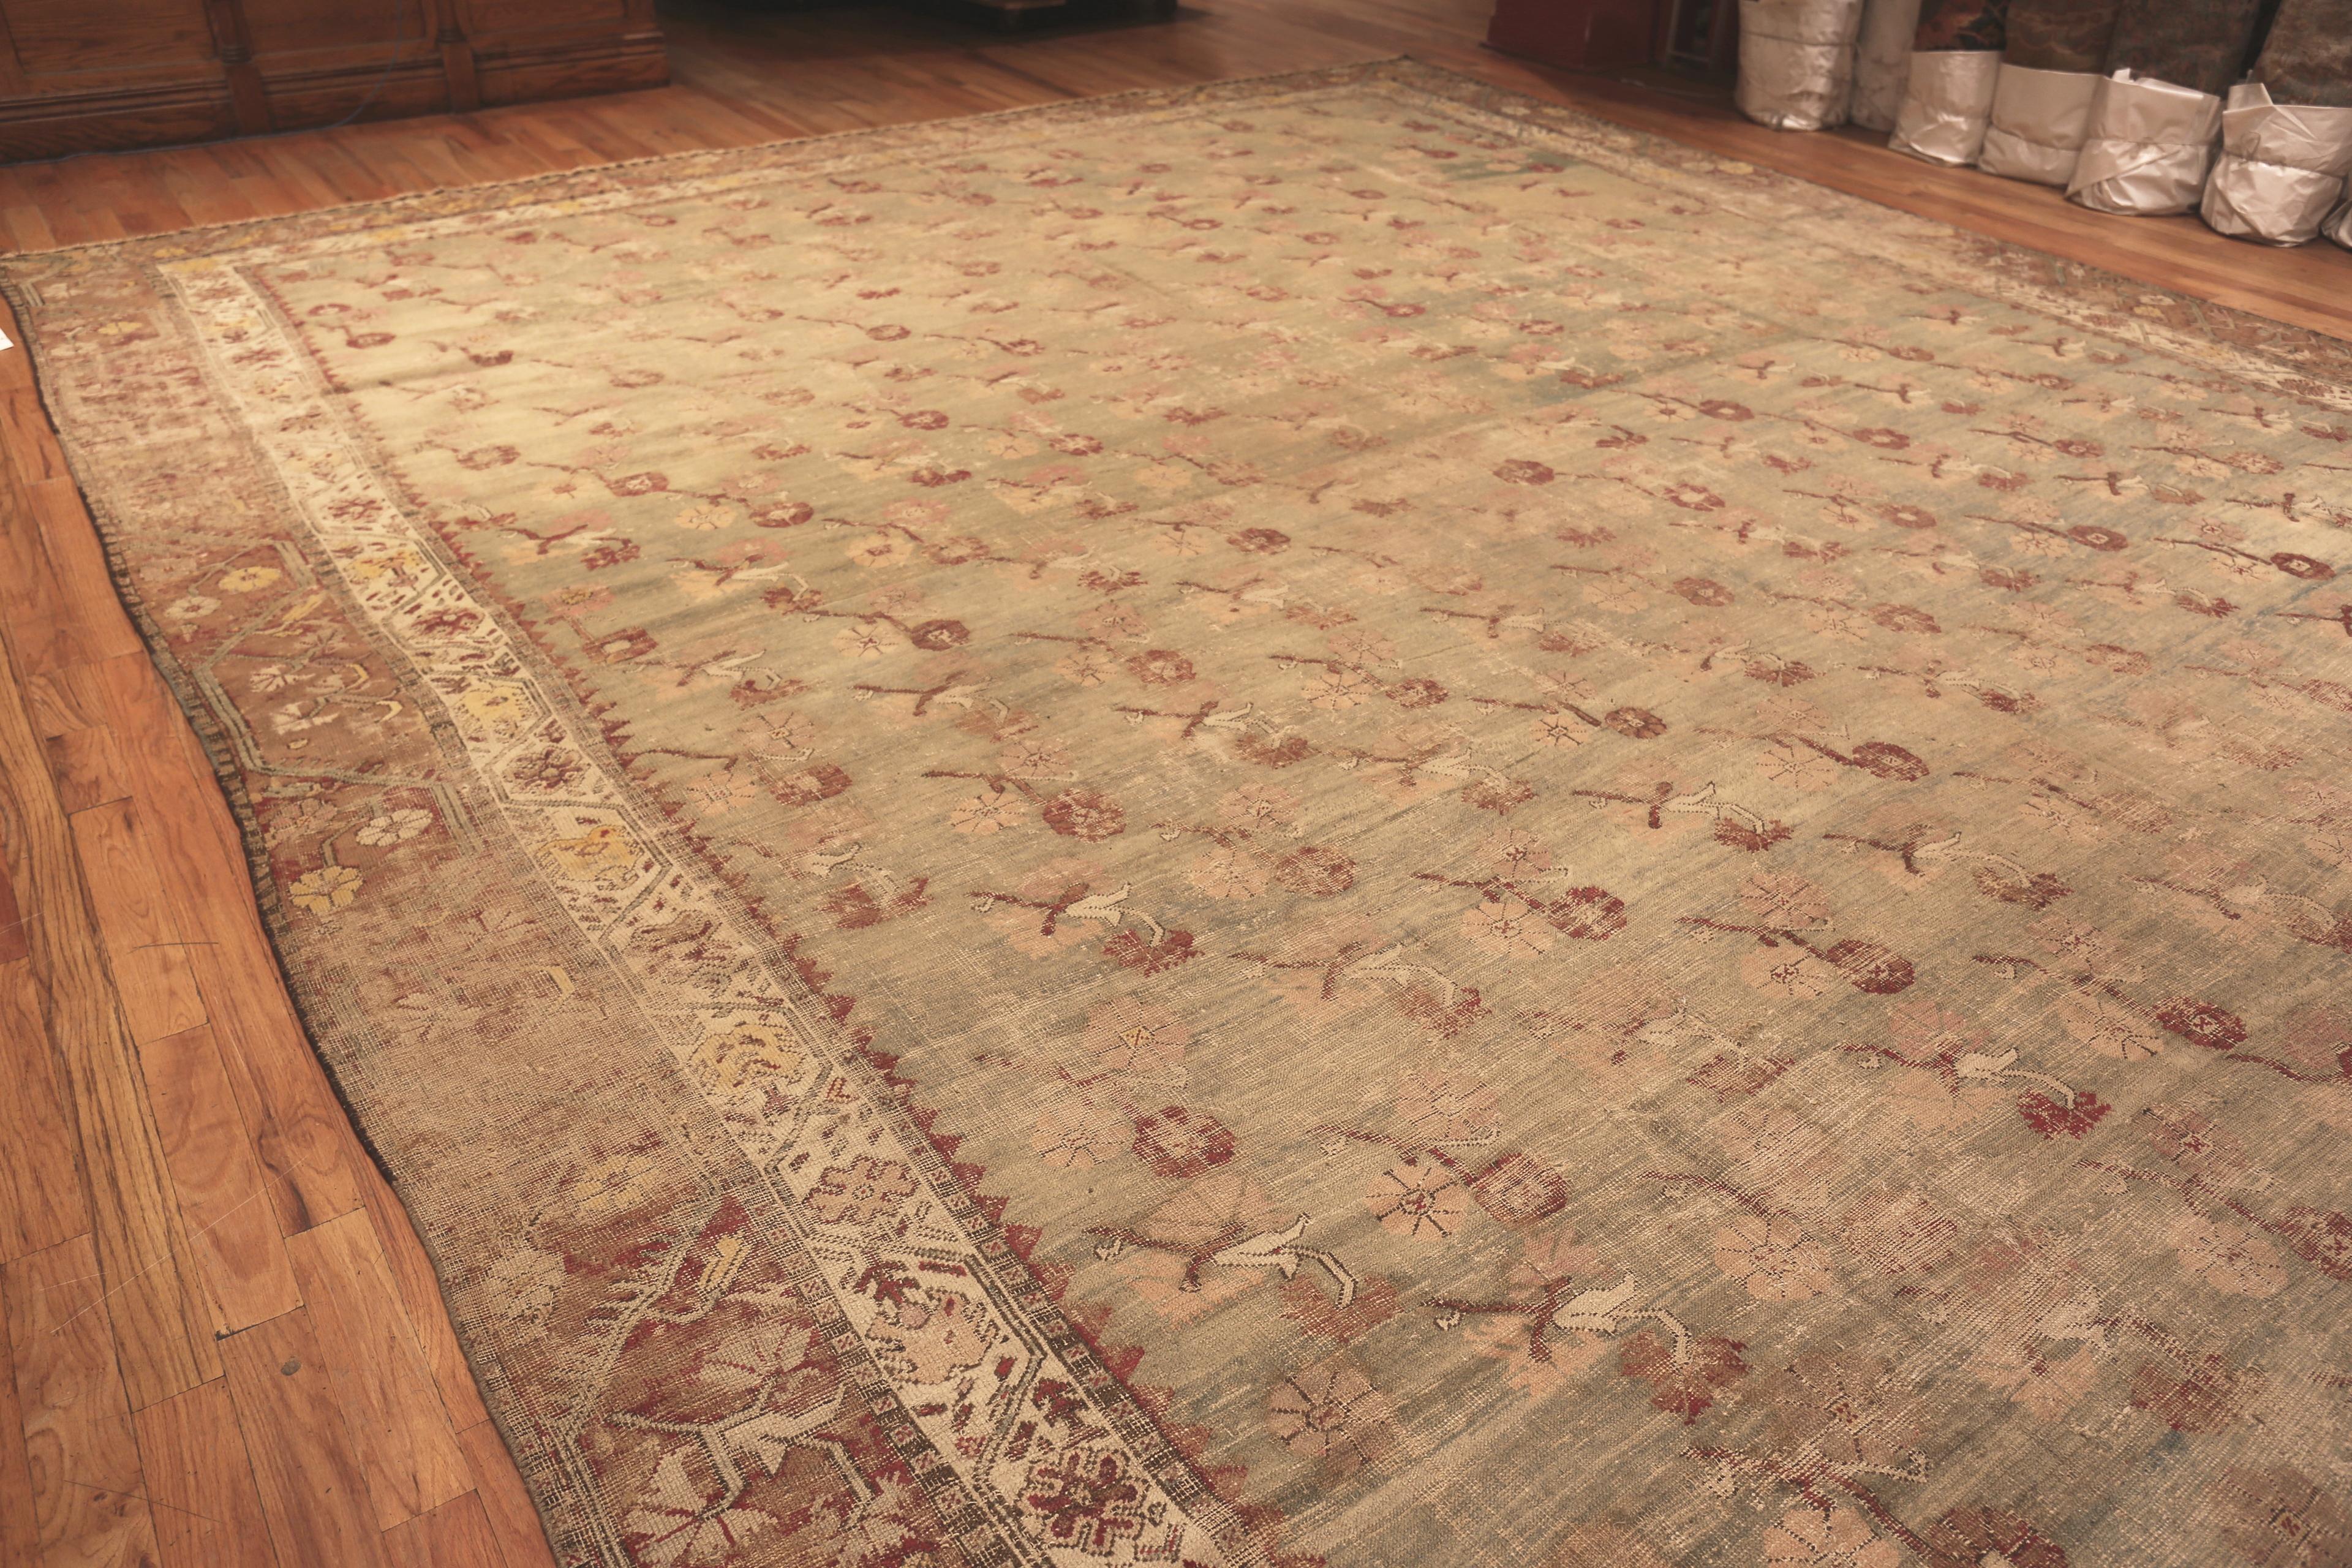 Large Antique Turkish Ghiordes Rug, Country Of Origin: Turkey, Circa date: 1820. Size: 15 ft 6 in x 18 ft 7 in (4.72 m x 5.66 m)